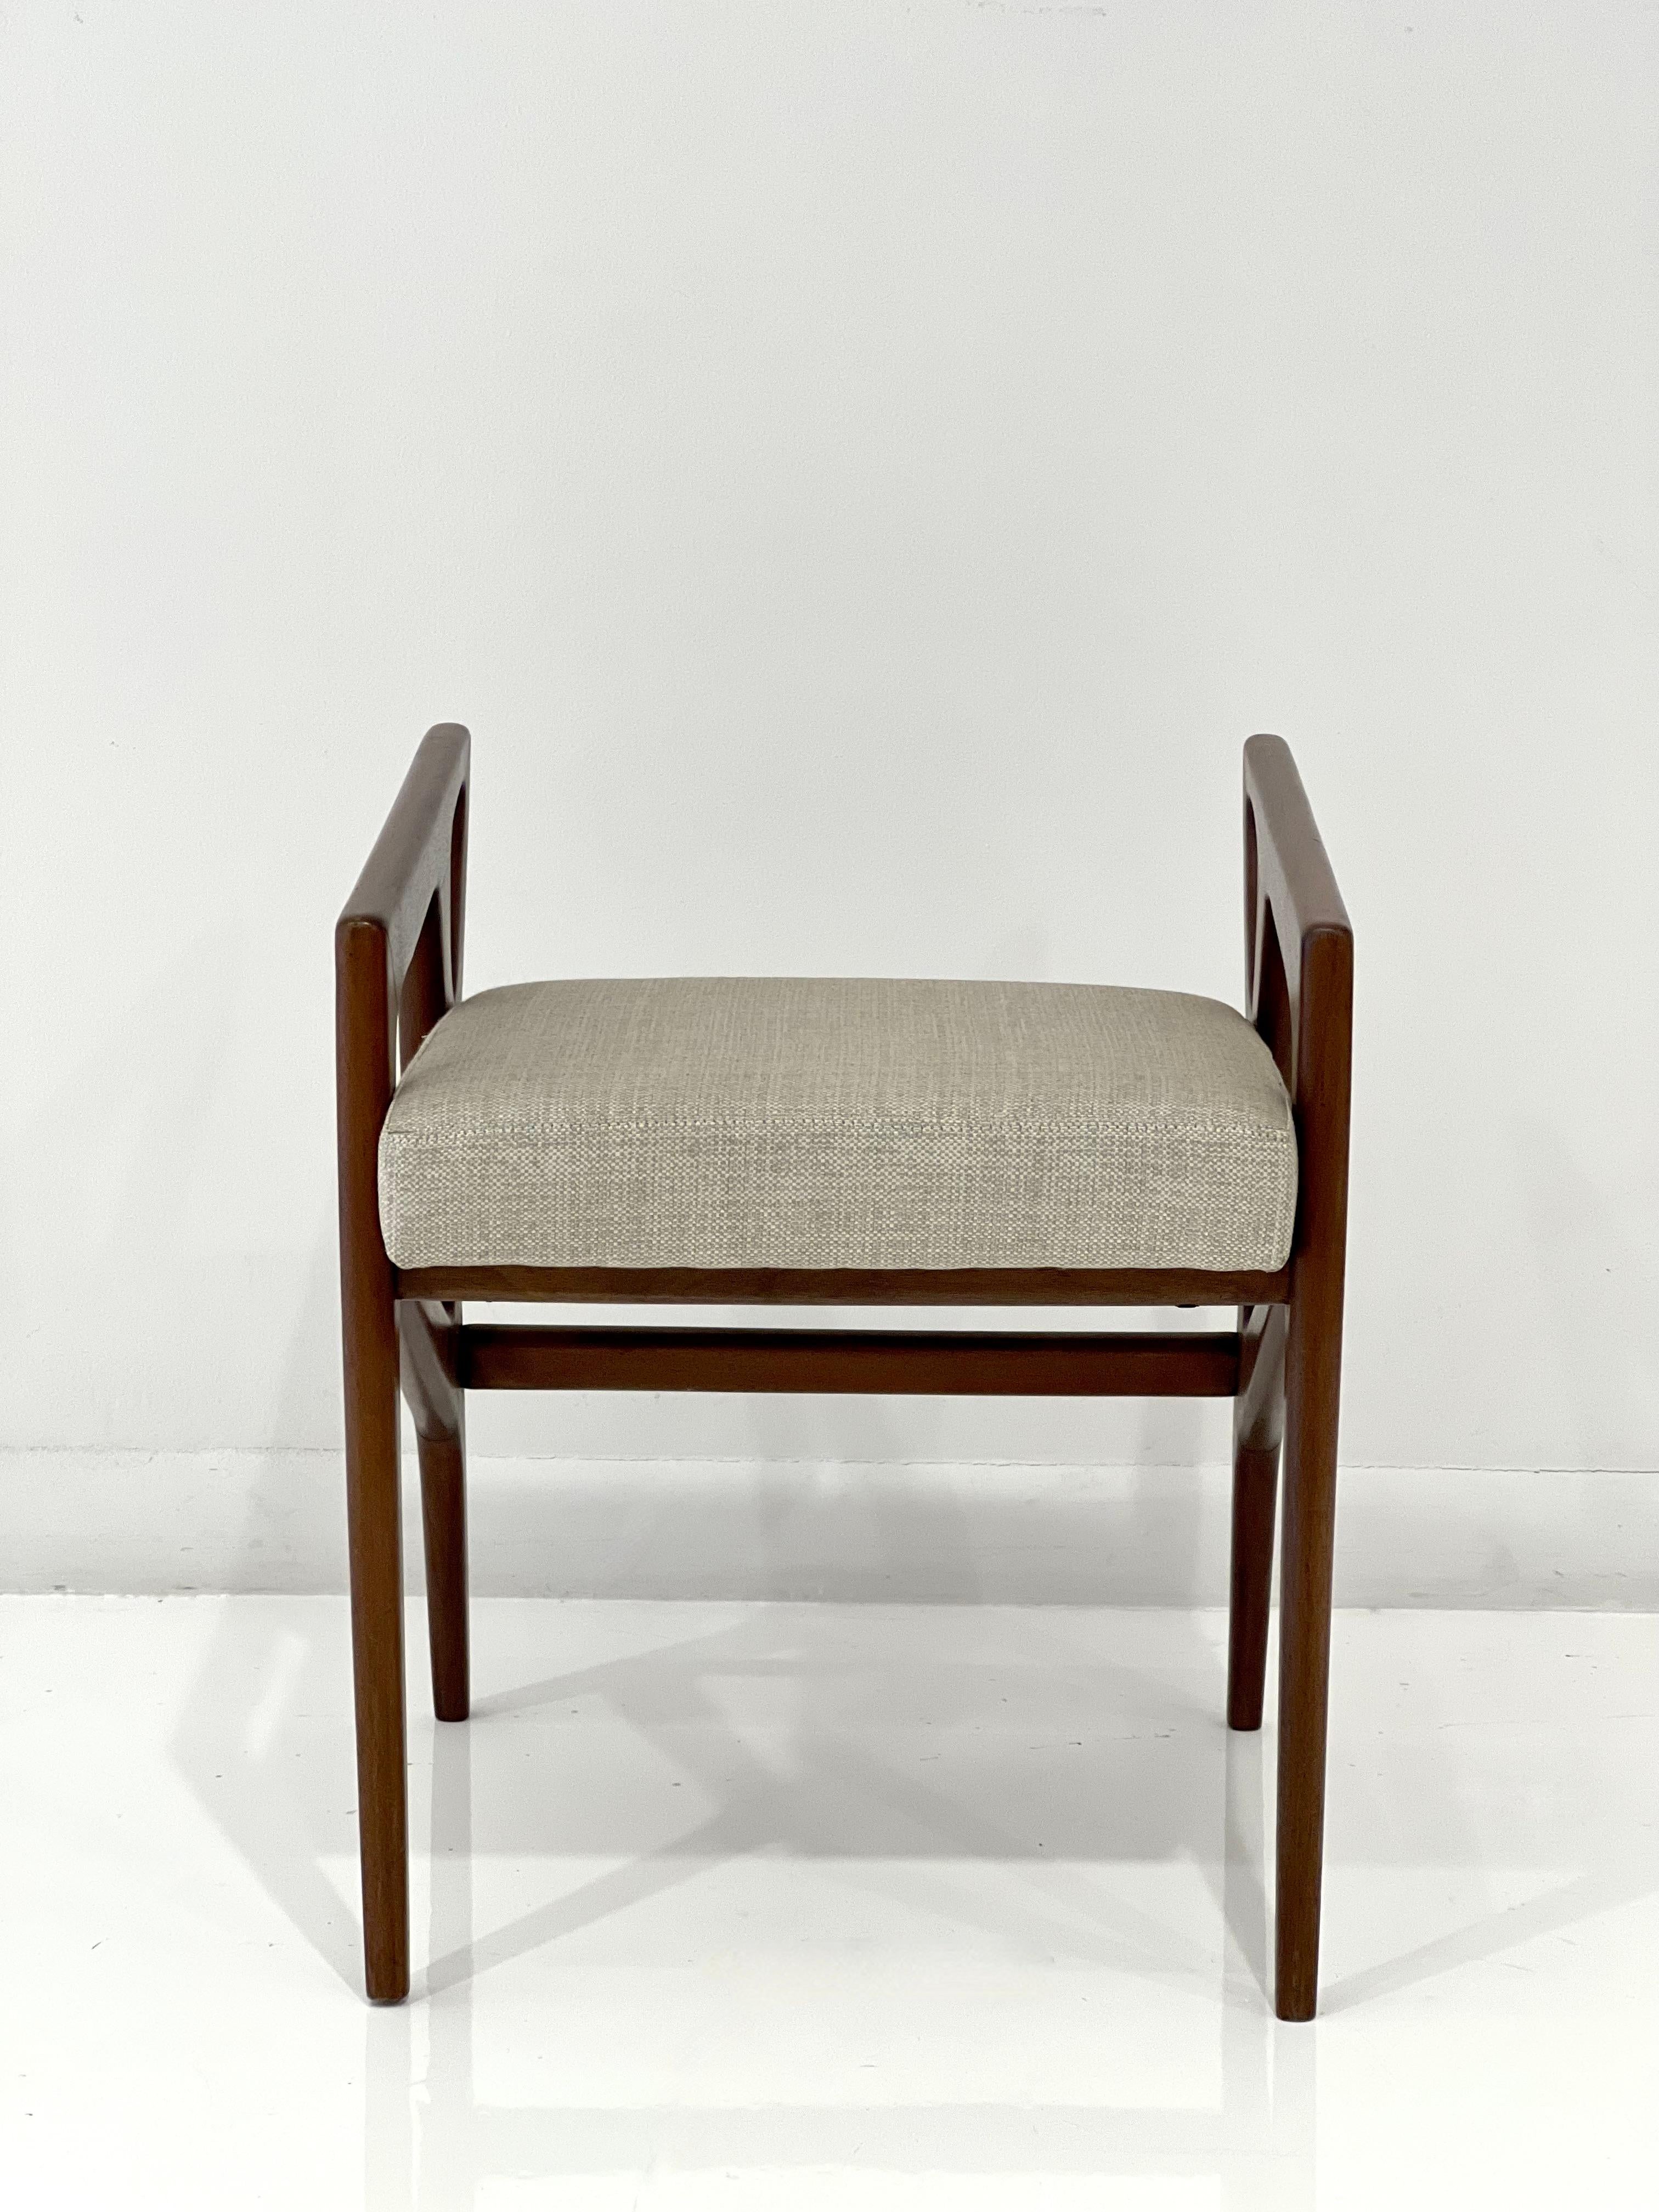 Iconic Sculptural Walnut Stool Model 687 by Gio Ponti. Italy, circa 1950's